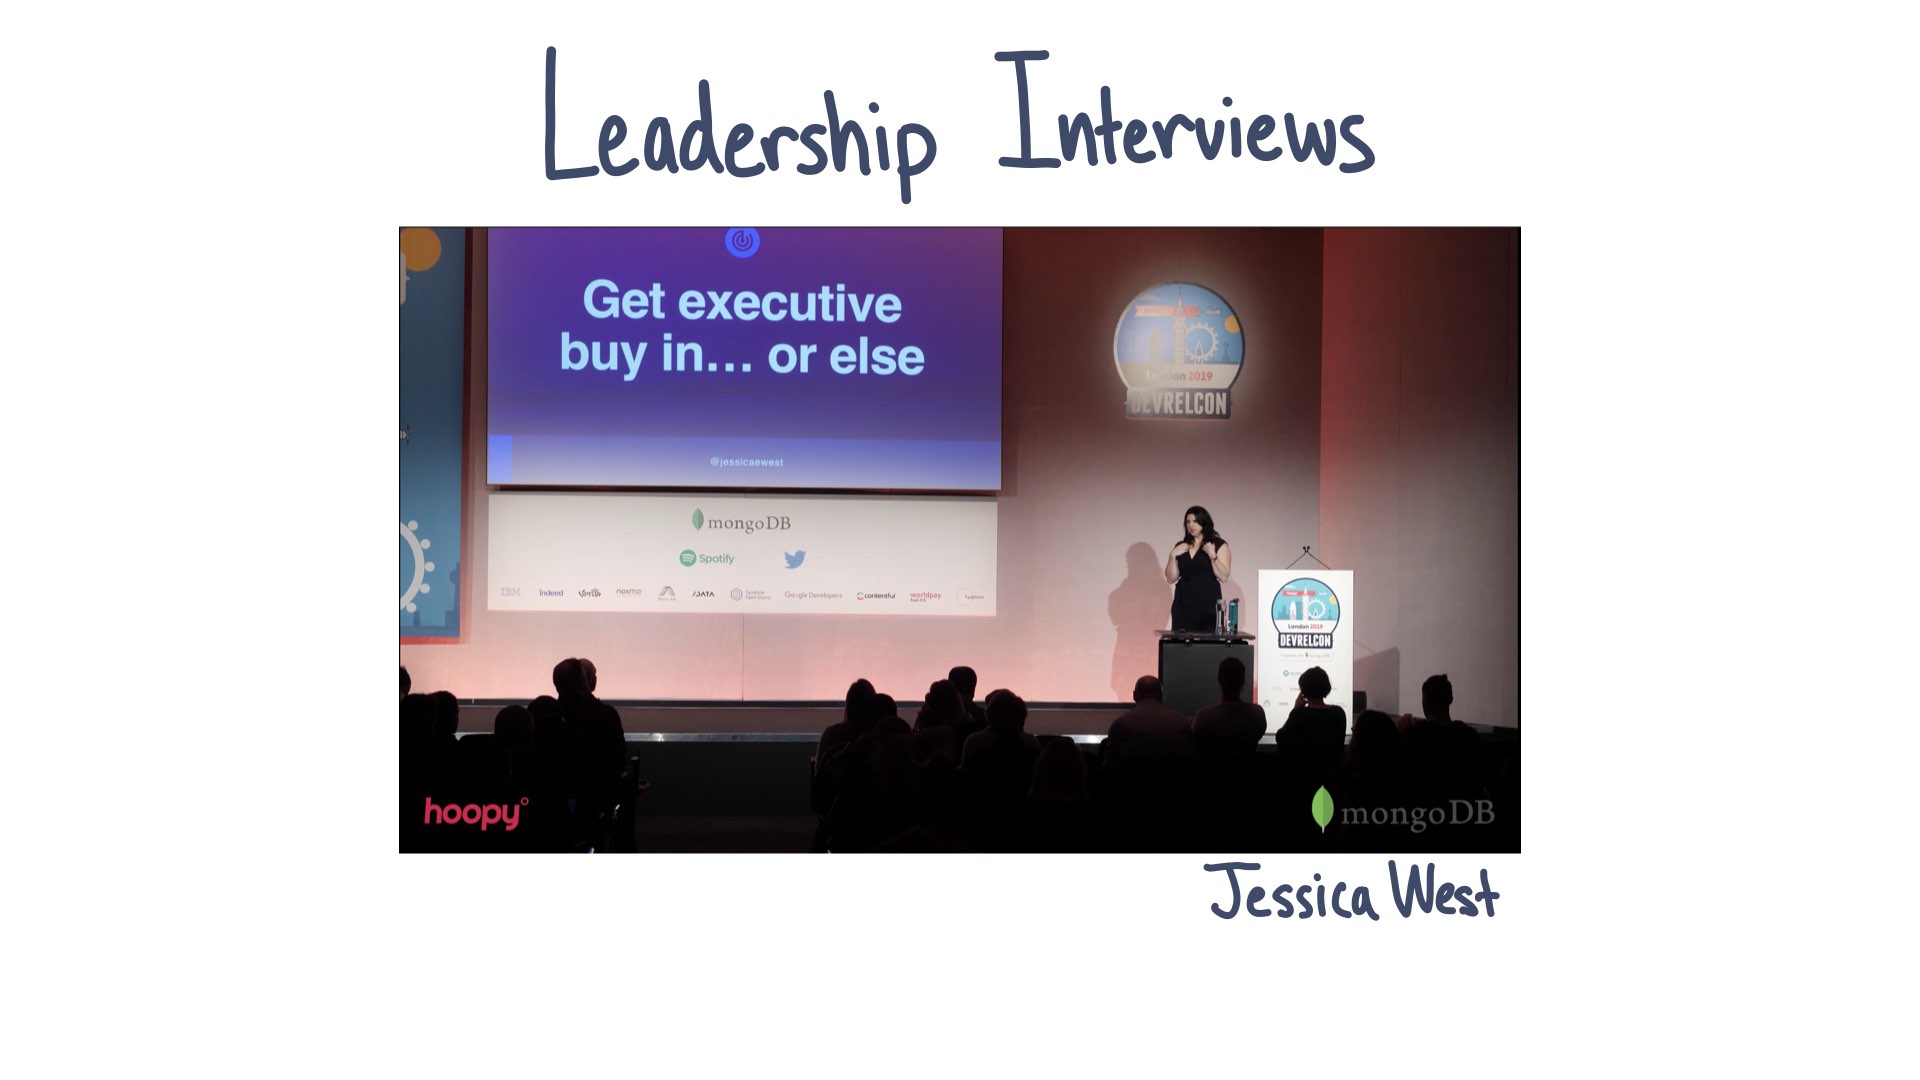 Leadership Interviews, image from talk by Jessica West